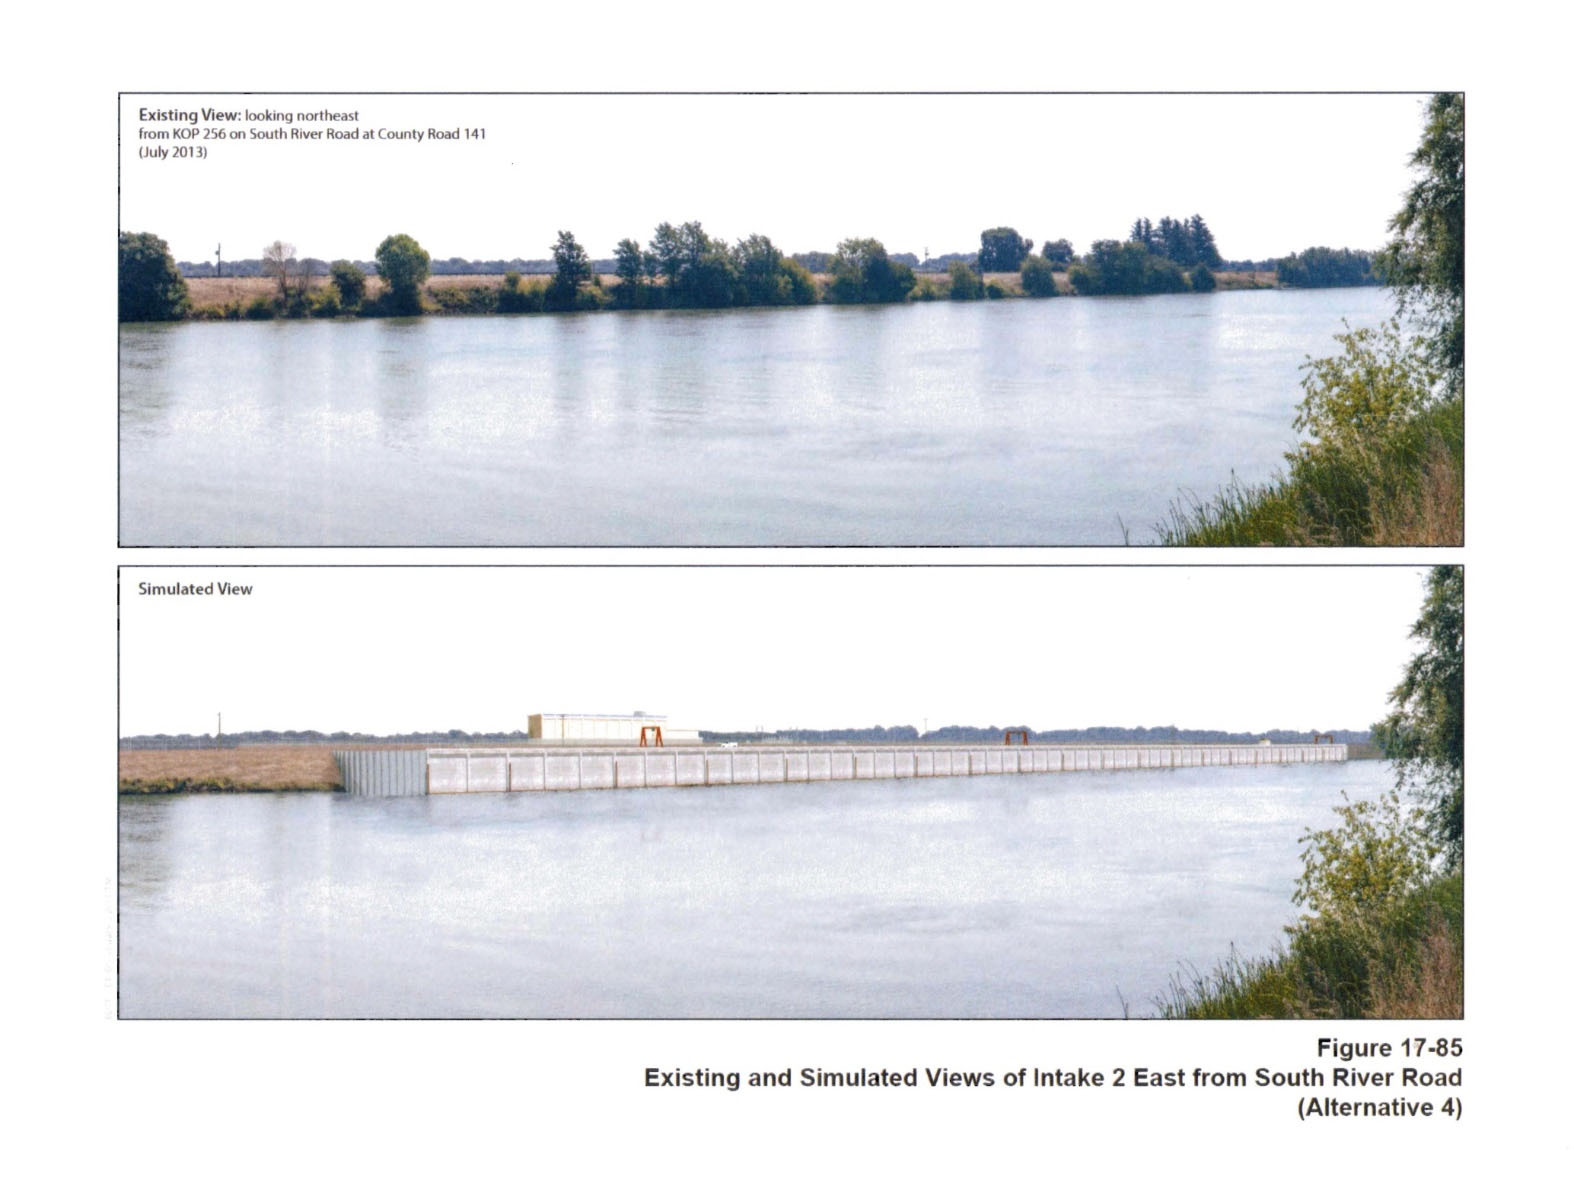 Image showing Existing and Simulated Views of Intake 2 East from South River Road. ​Each screen is over 1,300 feet long